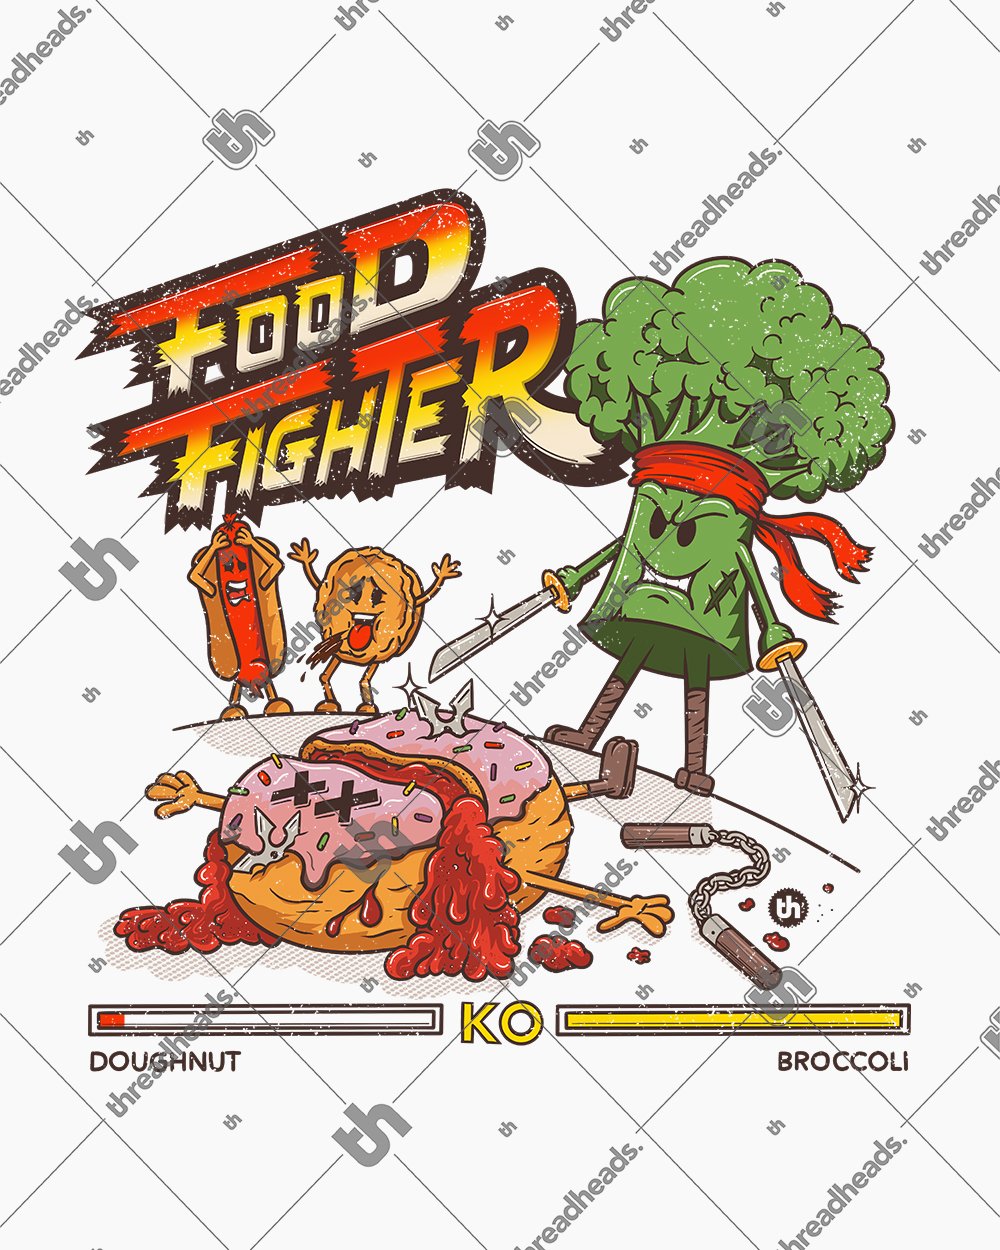 Food Fighter Hoodie Australia Online #colour_white